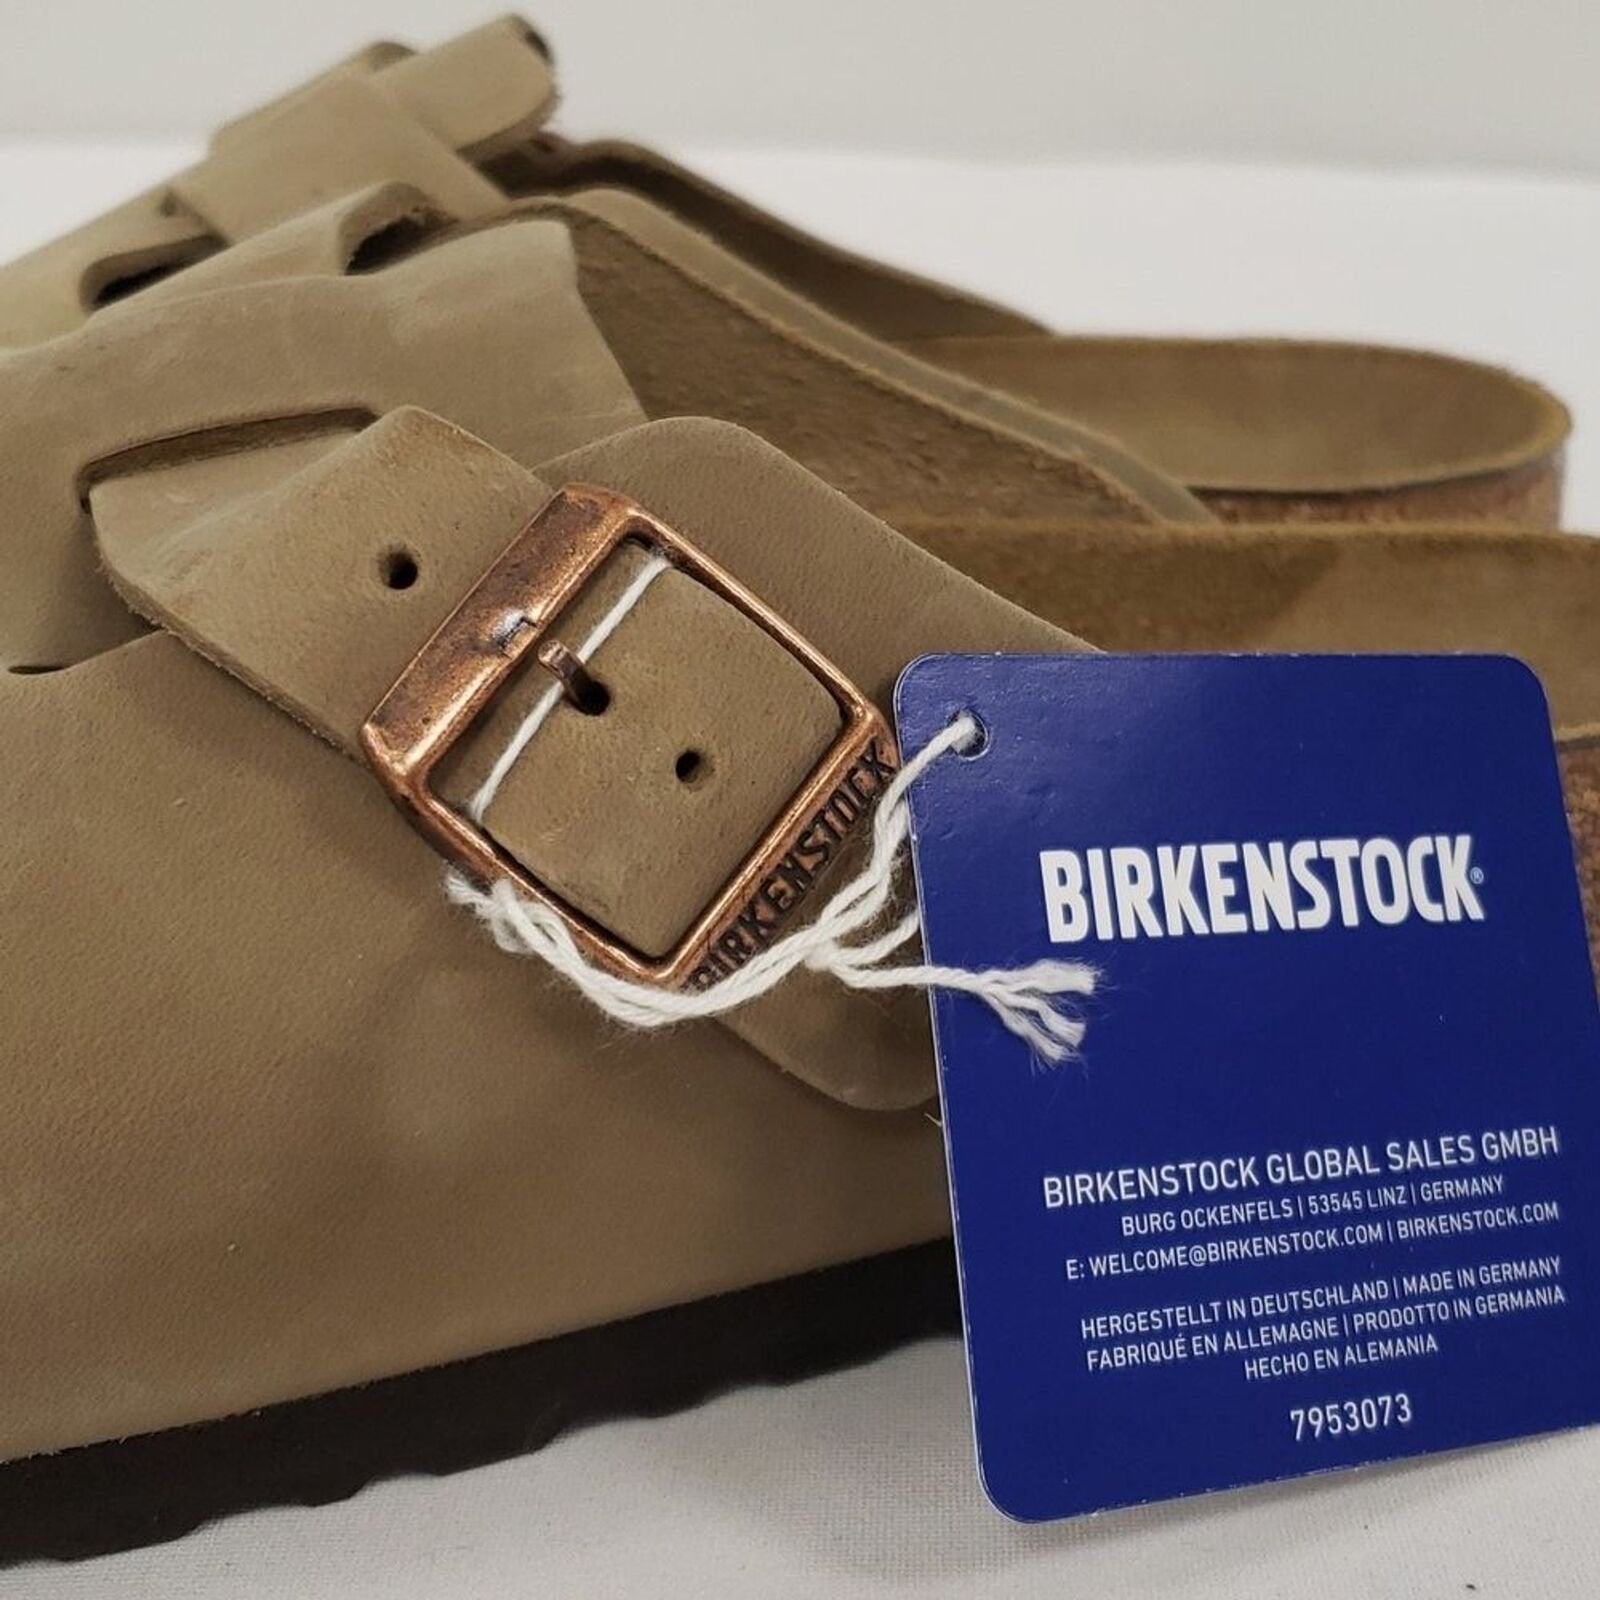 Birkenstock Unisexs Clogs and Mules brown leather 8 us